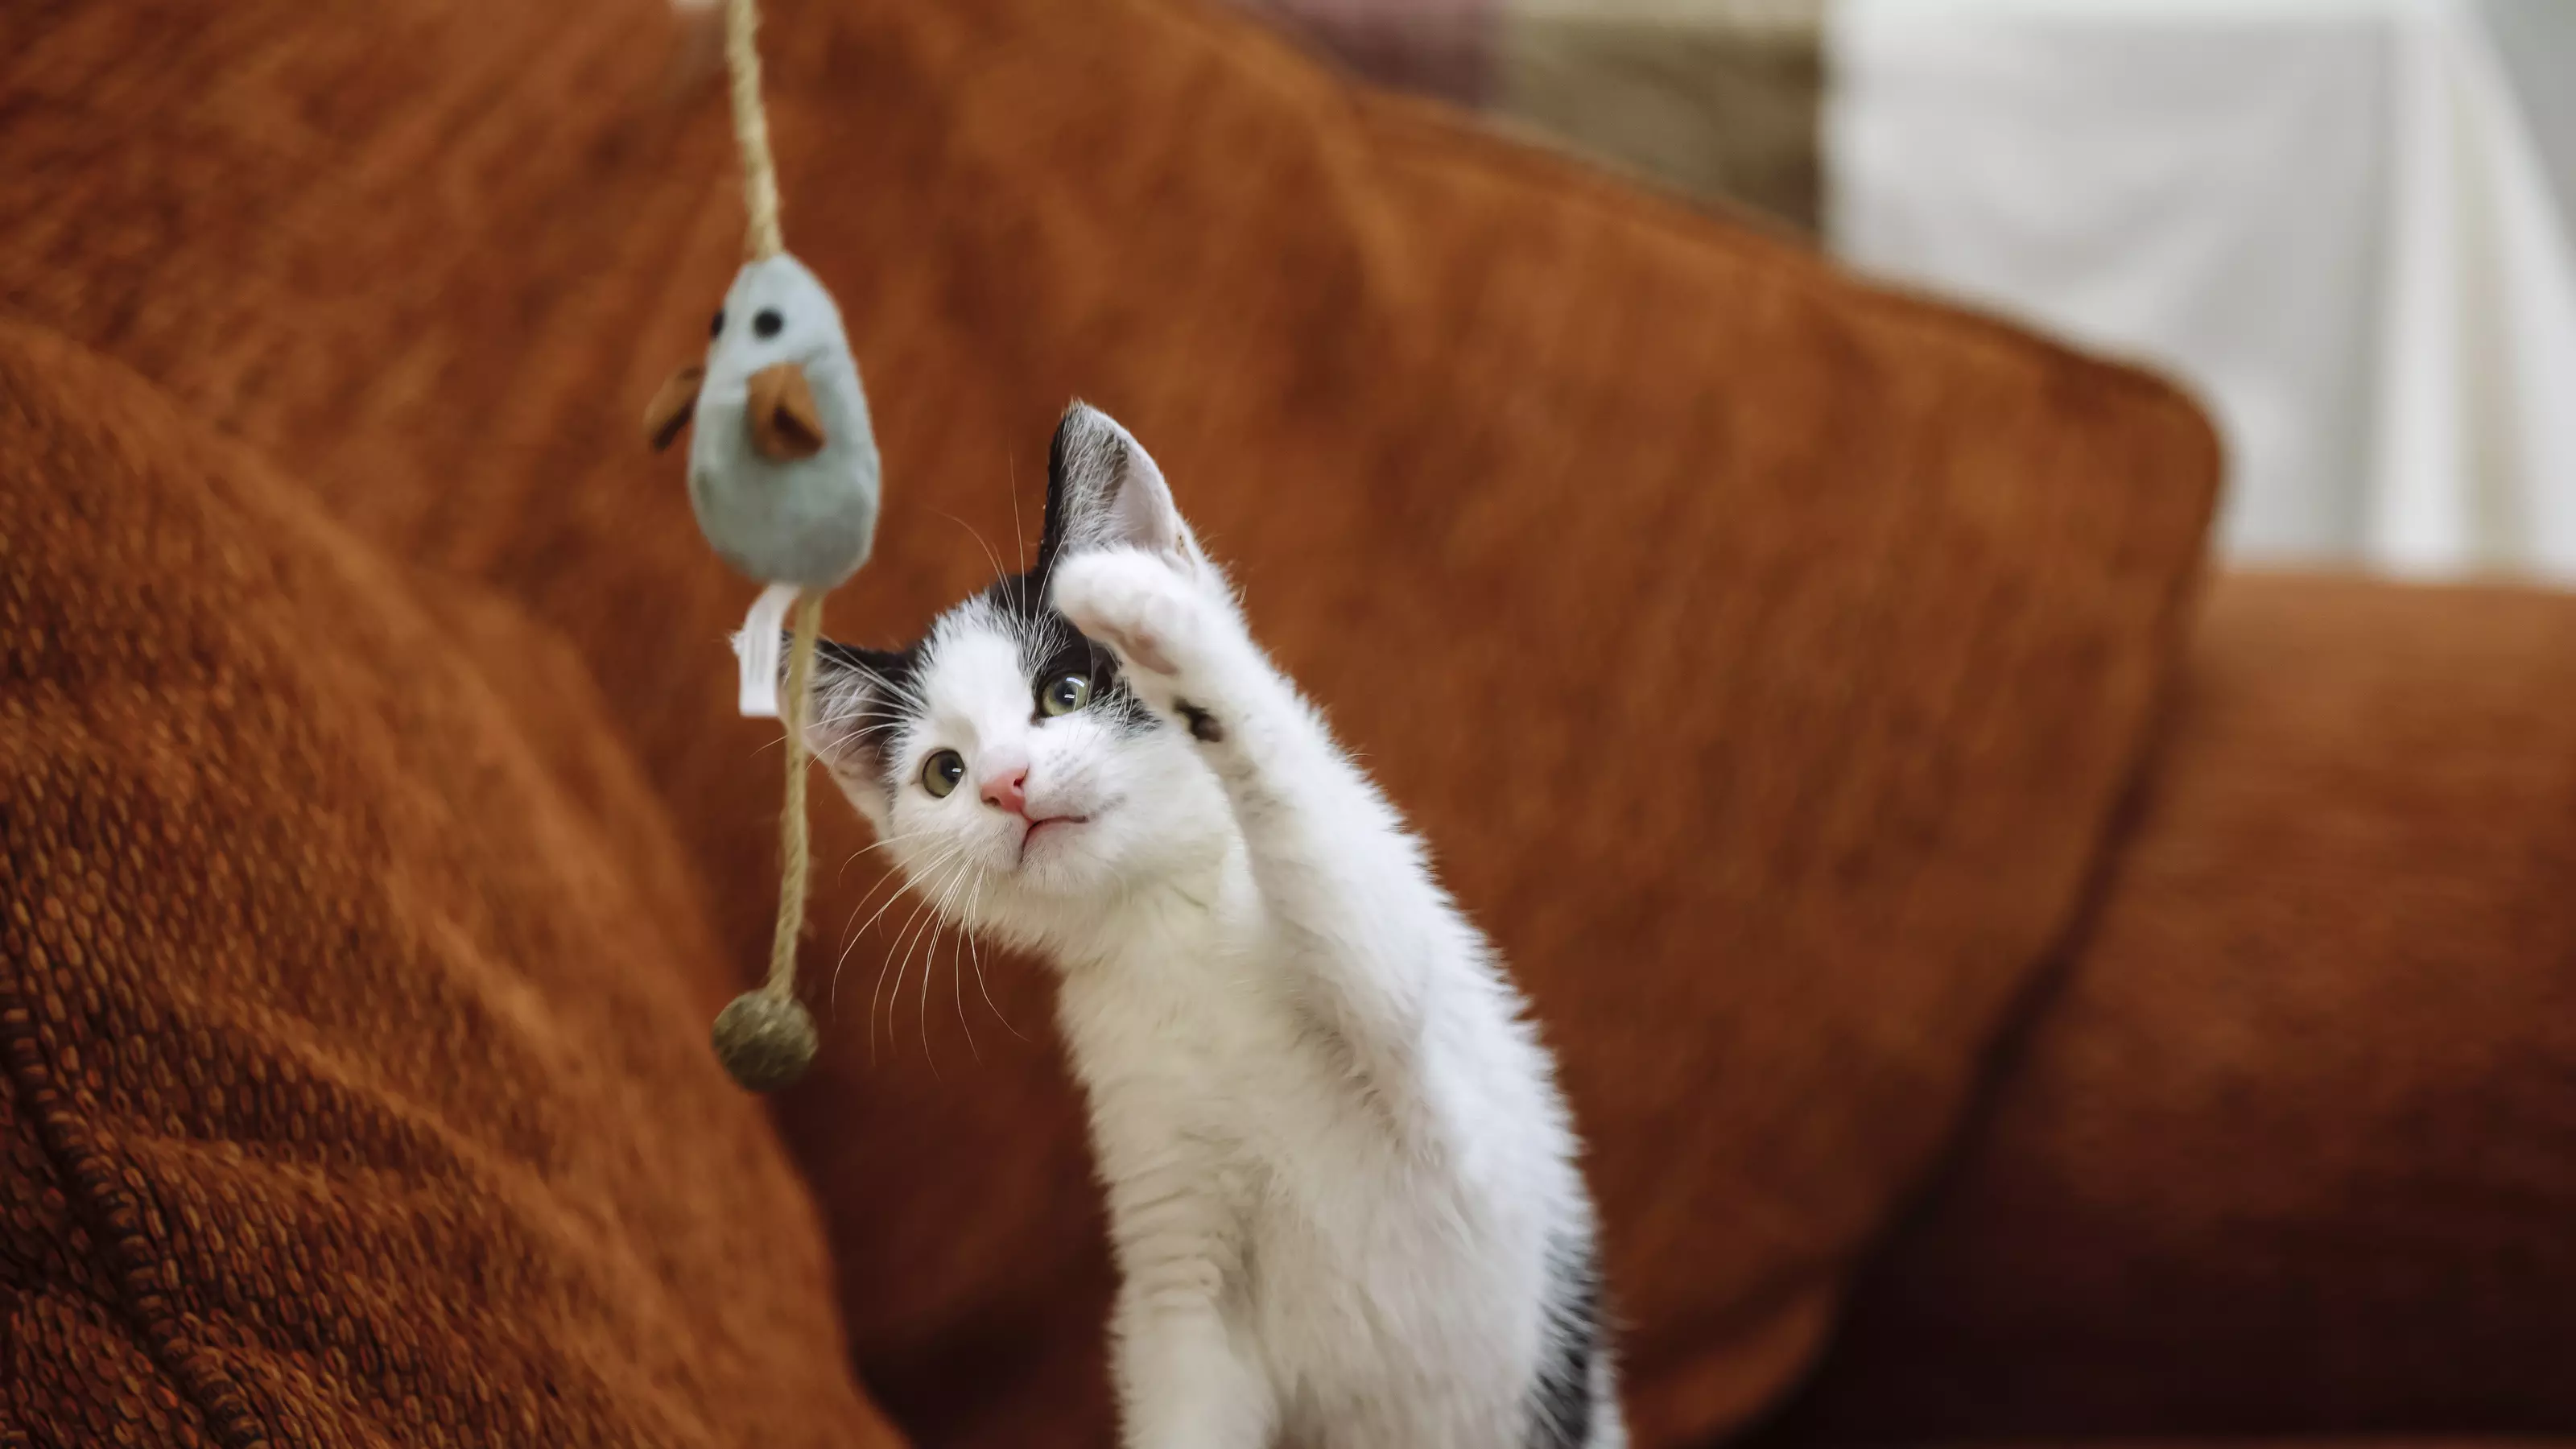 a white and black kitten takes a swipe at a mouse fishing rod toy